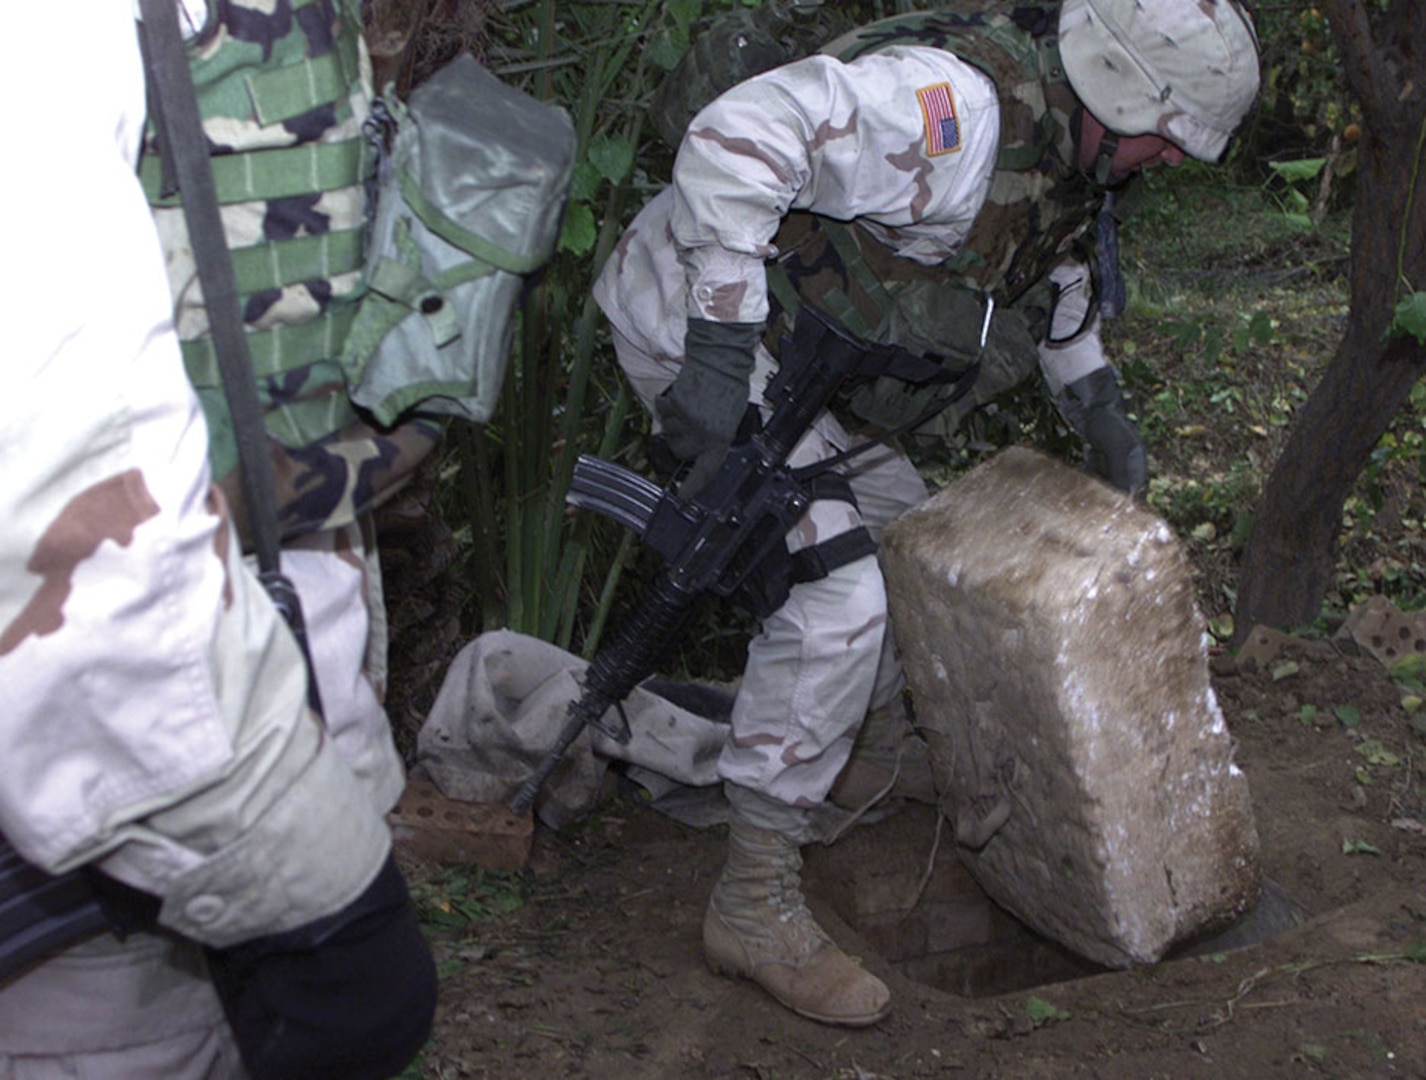 The SOTF leader calmly replaced the cover on the hole and replied, ‘President Bush sends his regards.